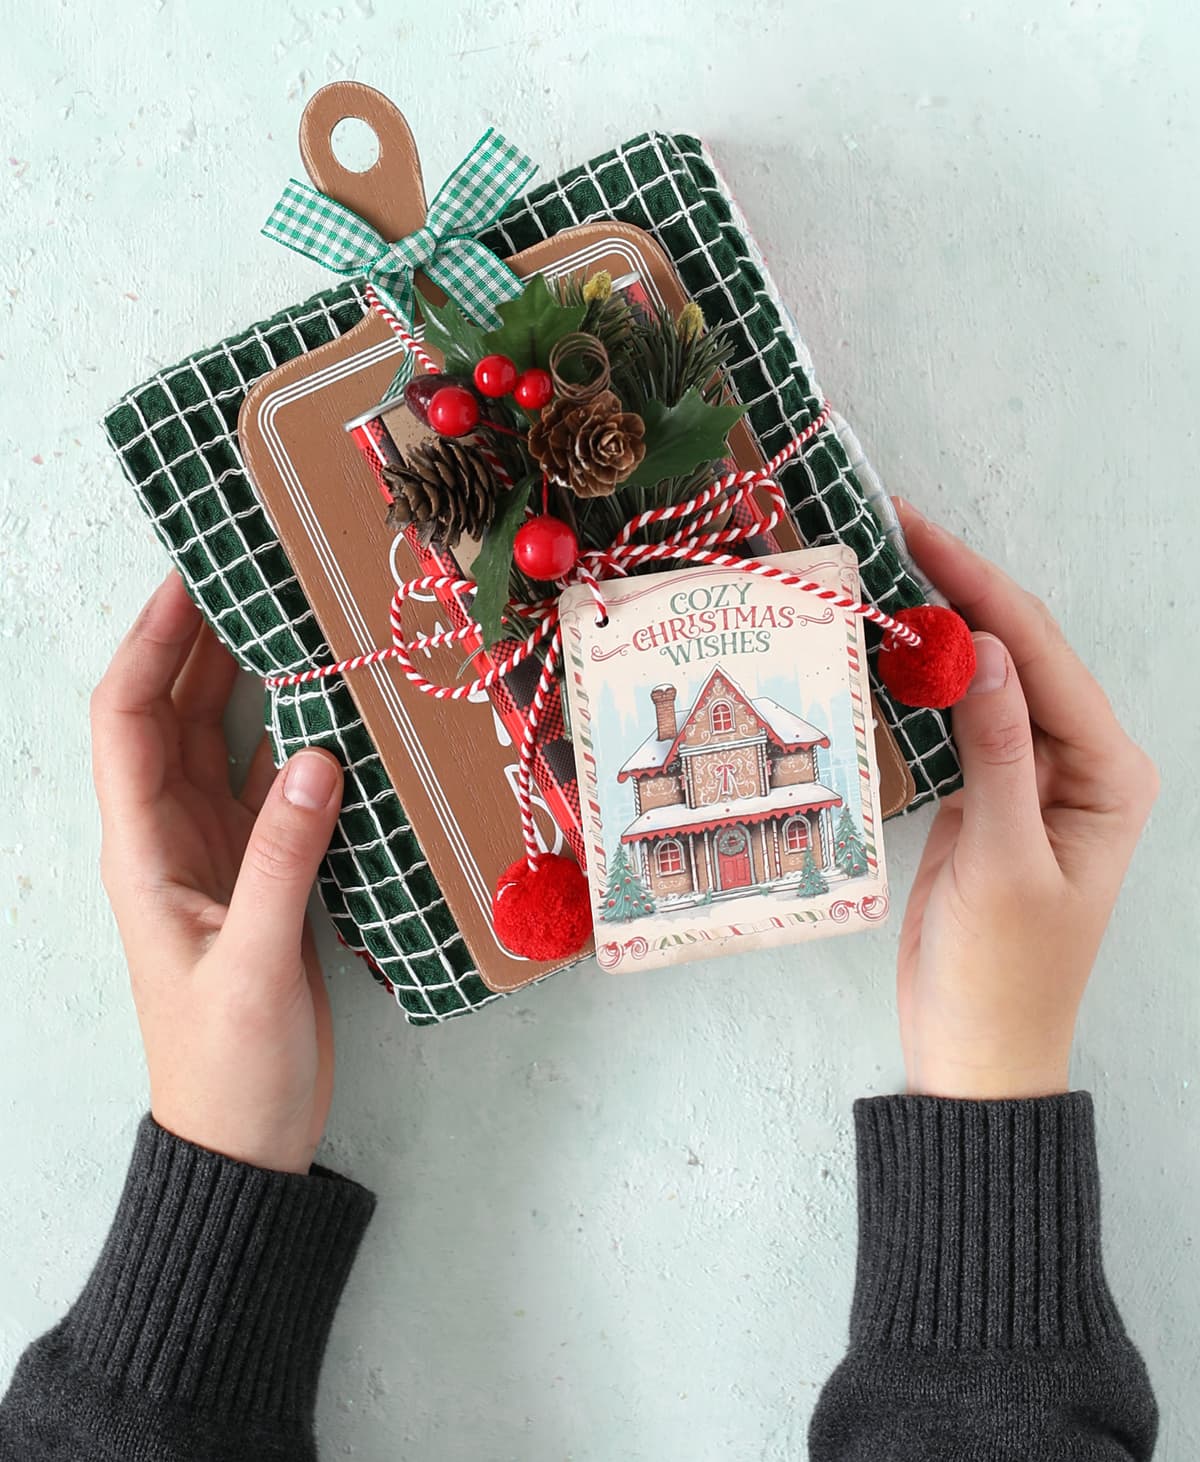 cozy christmas wishes gift idea